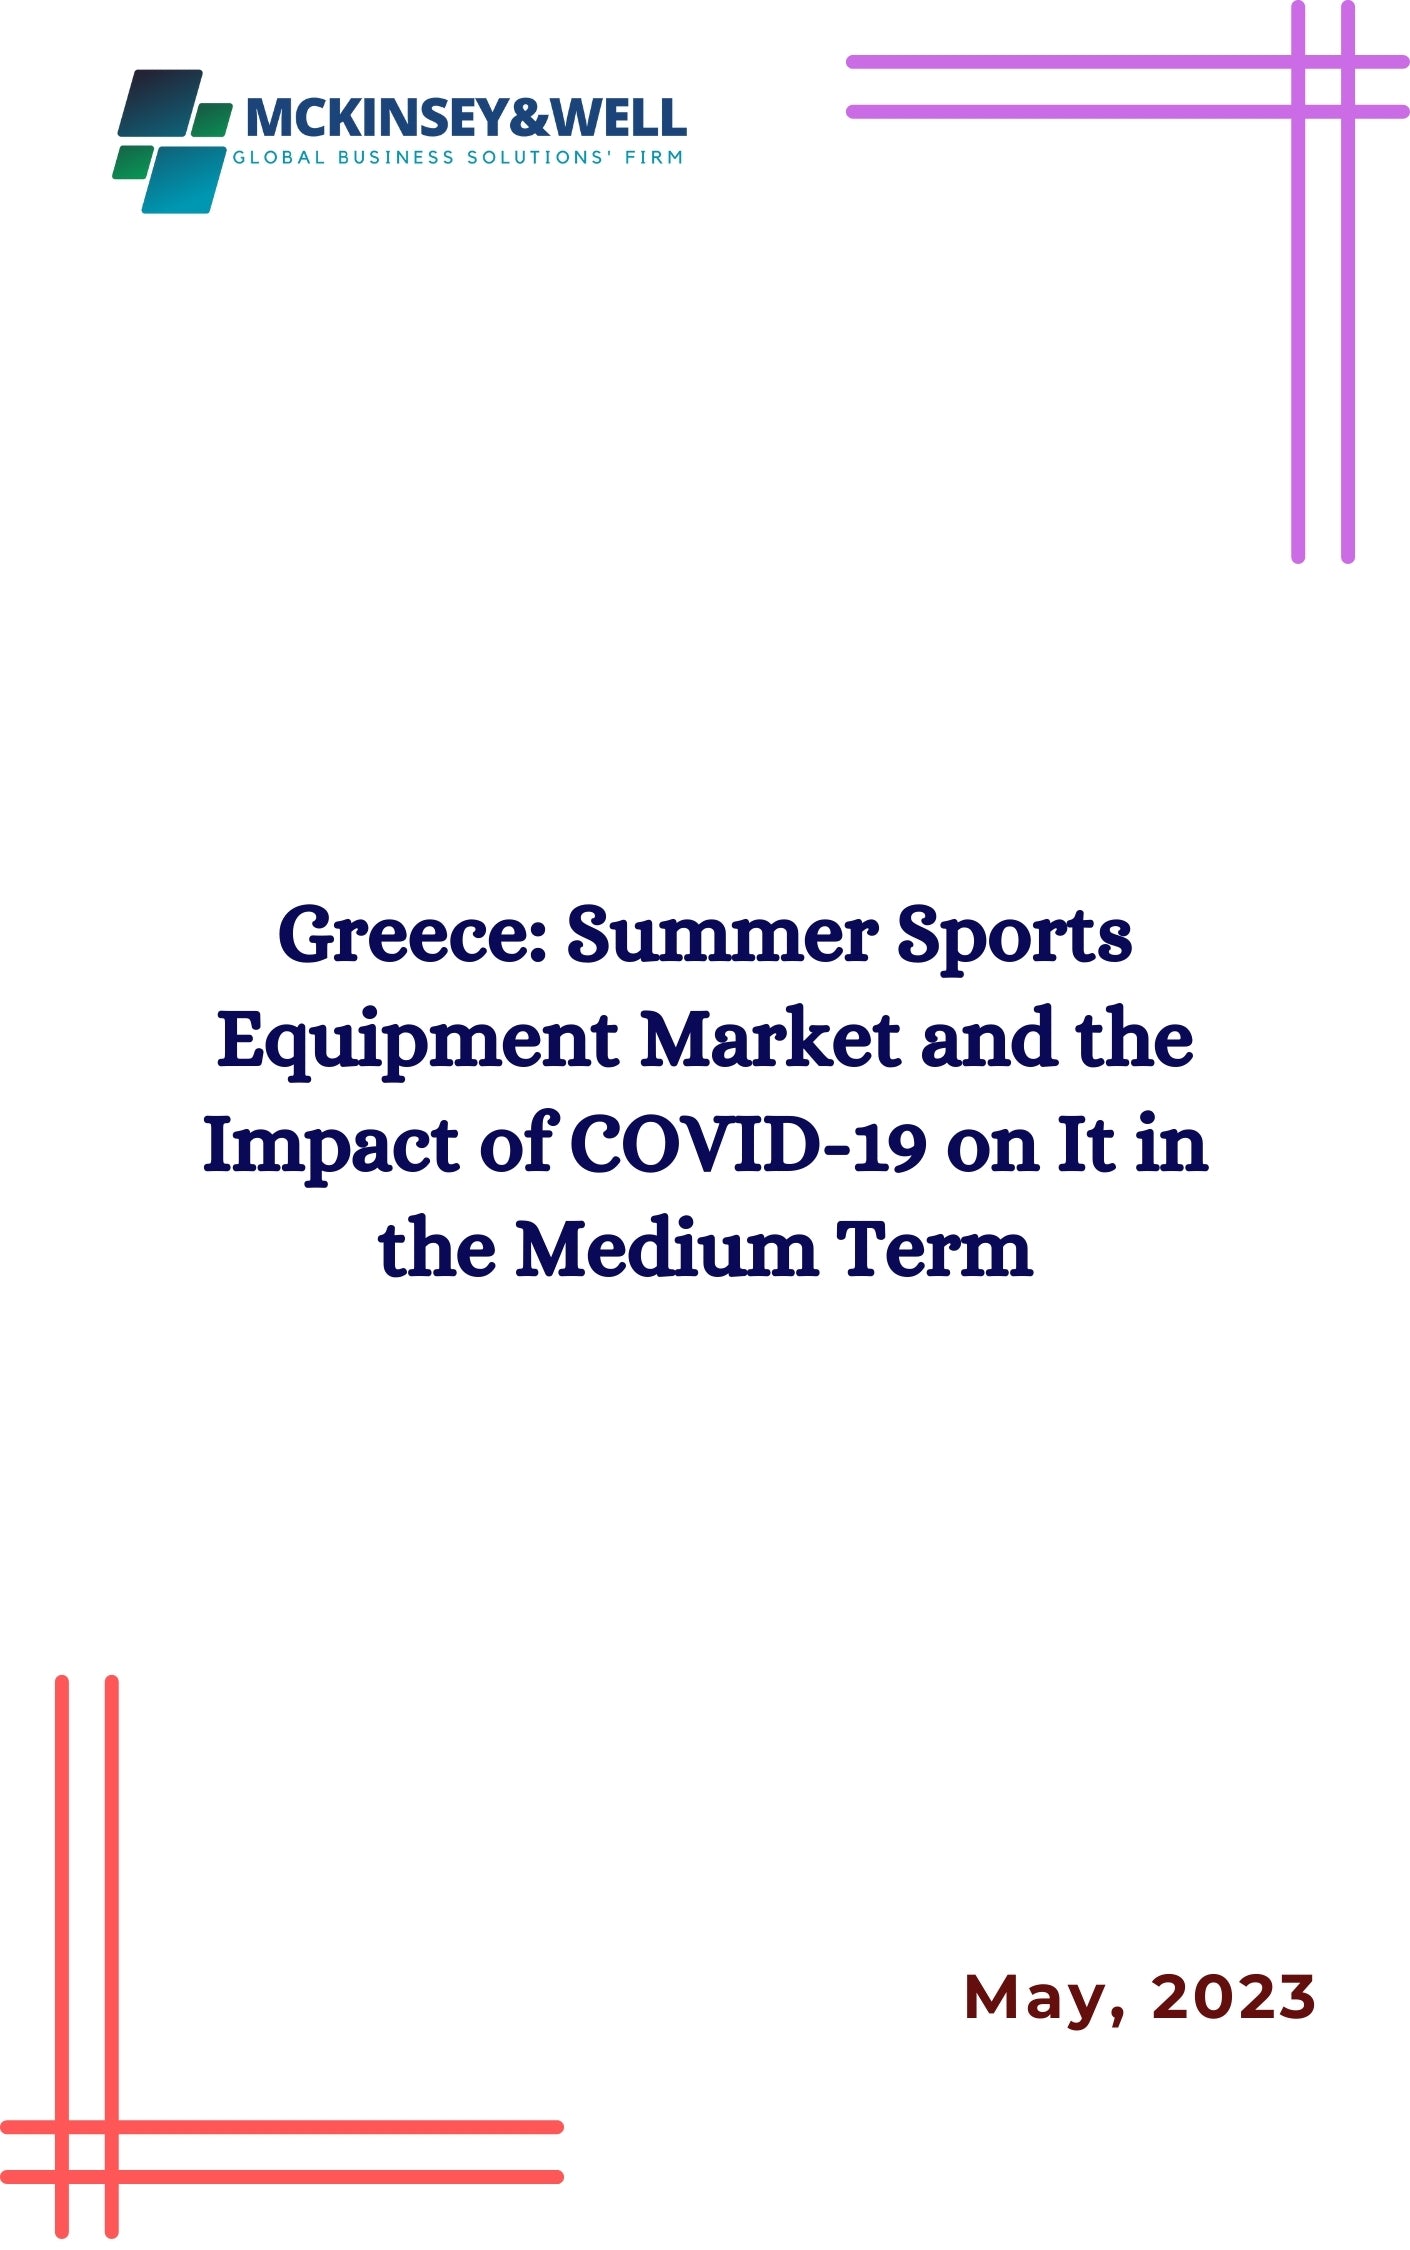 Greece: Summer Sports Equipment Market and the Impact of COVID-19 on It in the Medium Term